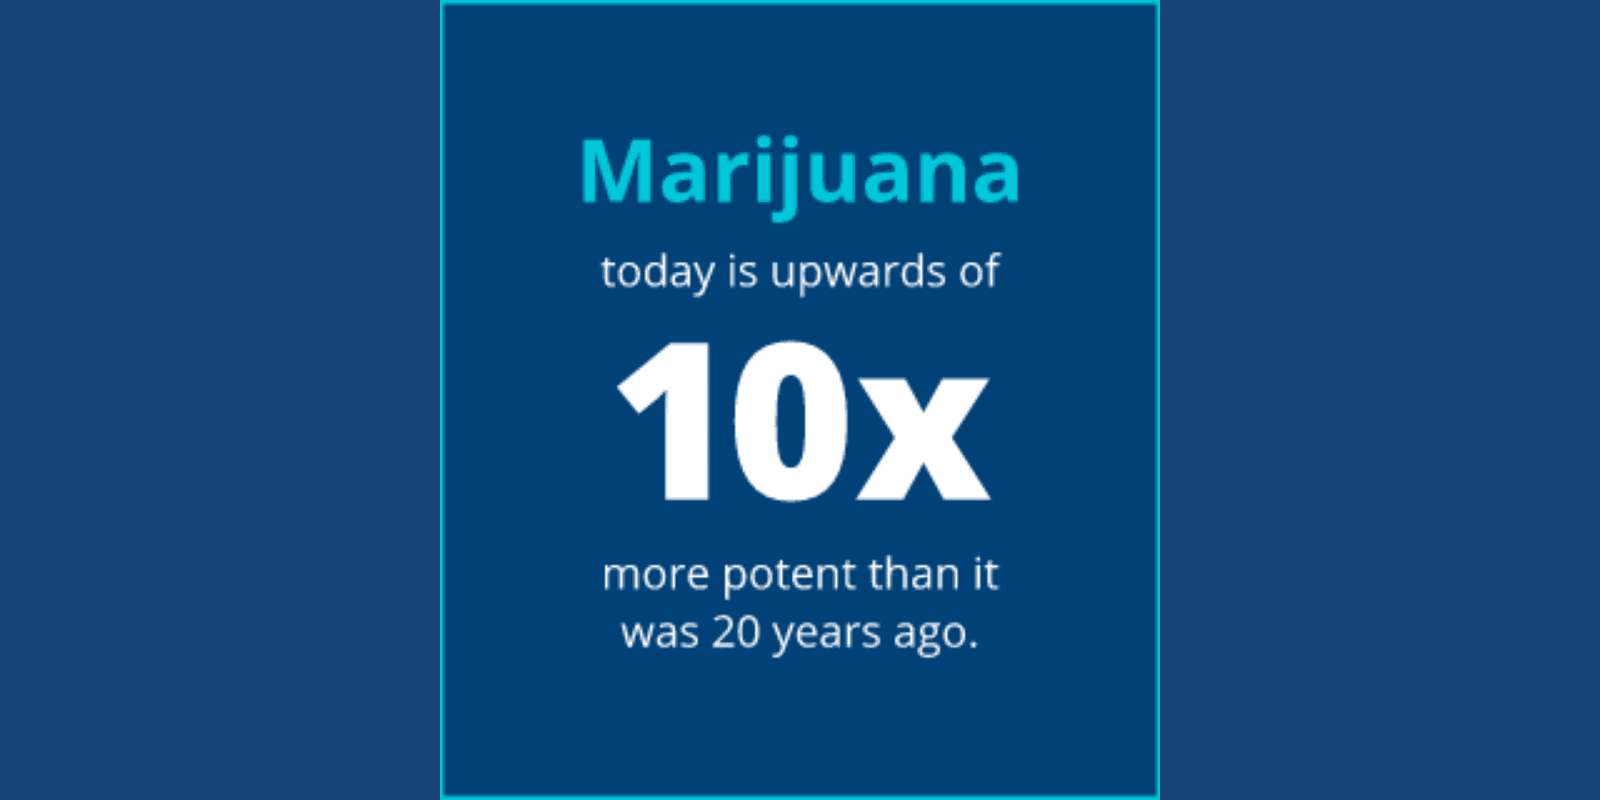 Marijuana today is upwards of 10x more potent than it was 20 years ago